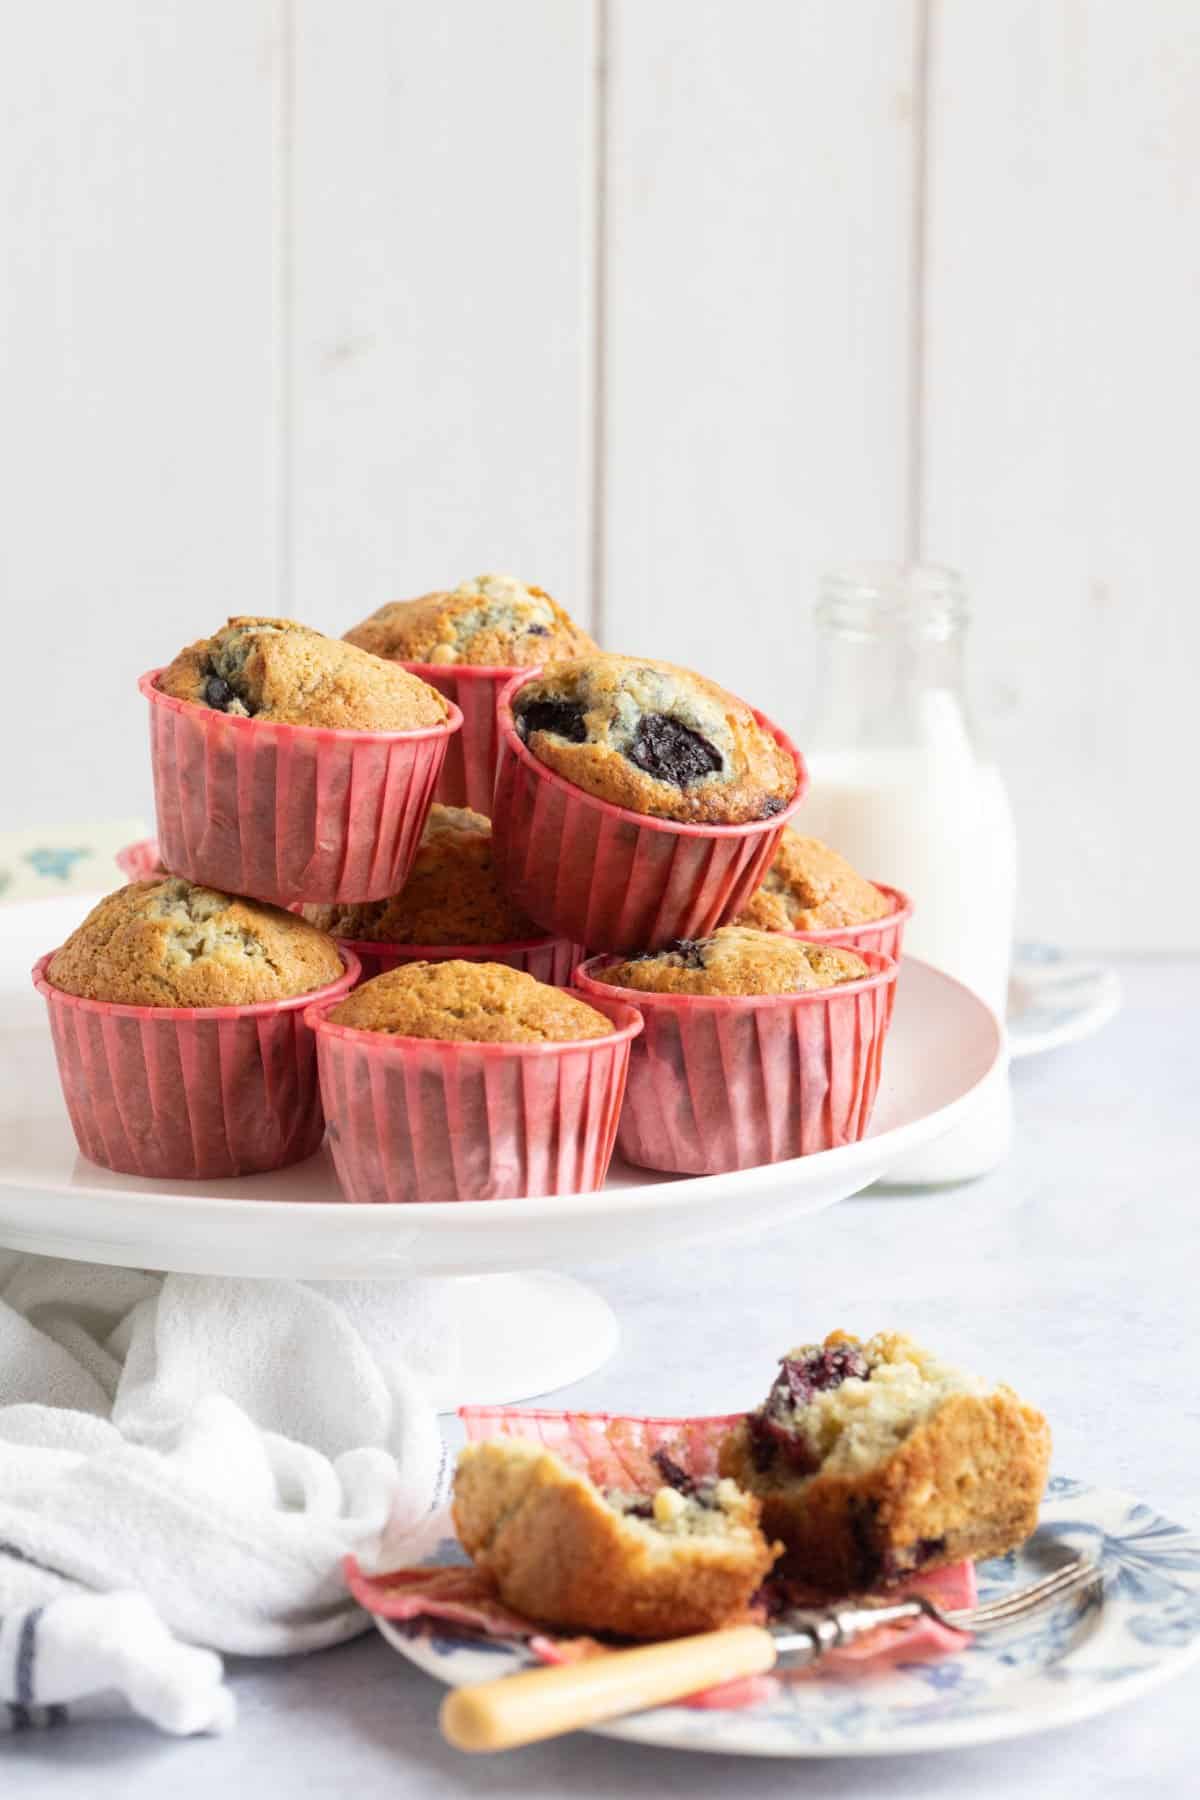 Cherry muffins on a cake stand with one muffin on a blue plate in front of the cake stand.